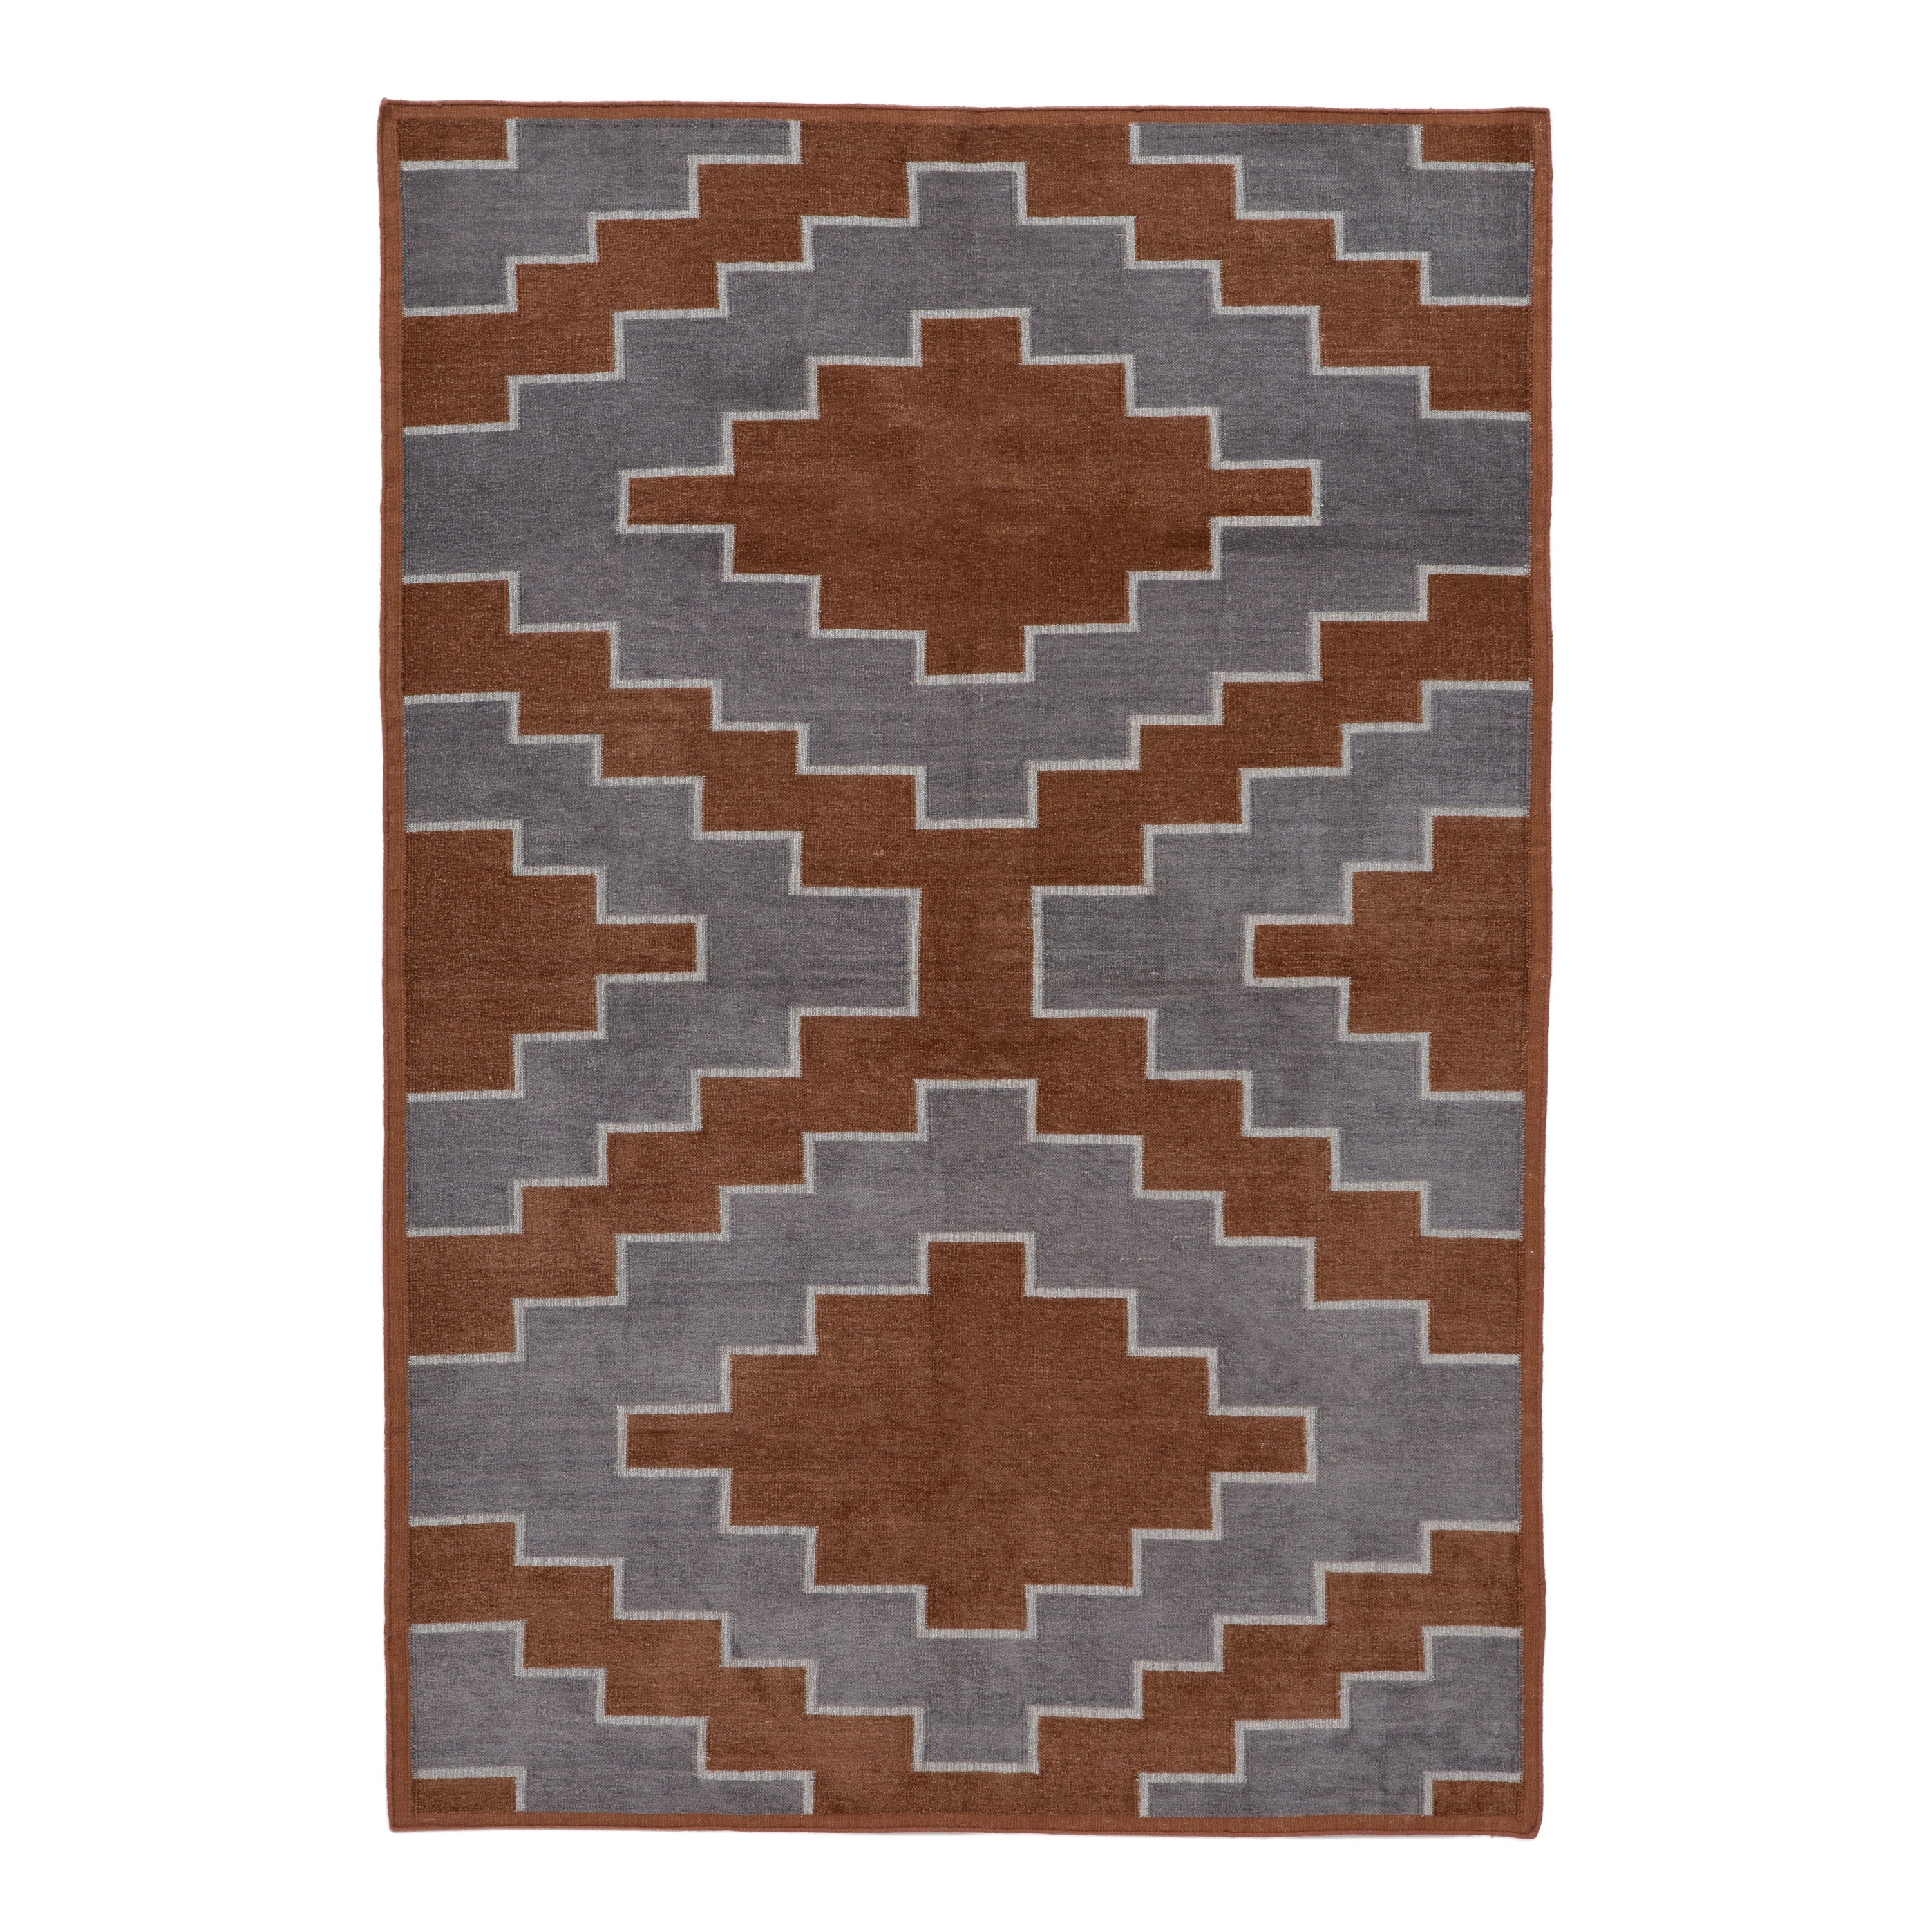 Brown and Grey Flatweave Chenille Rug - 3'6" x 5'6"